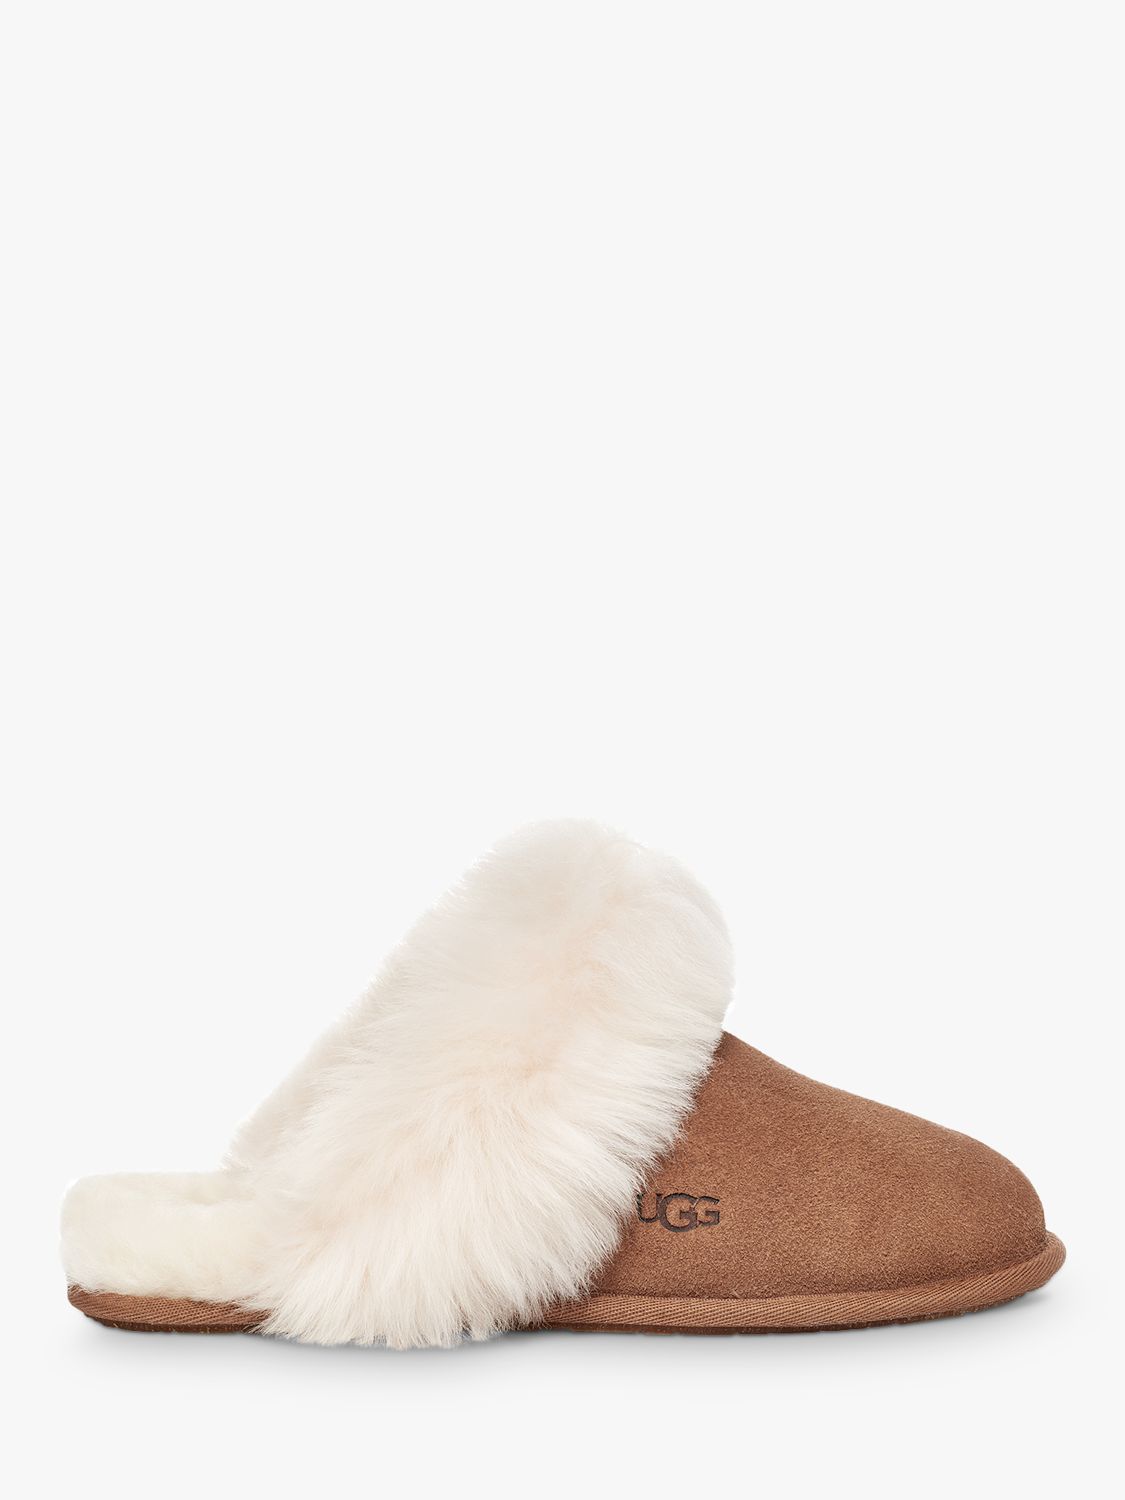 Buy UGG Scuff Sis Slippers Online at johnlewis.com